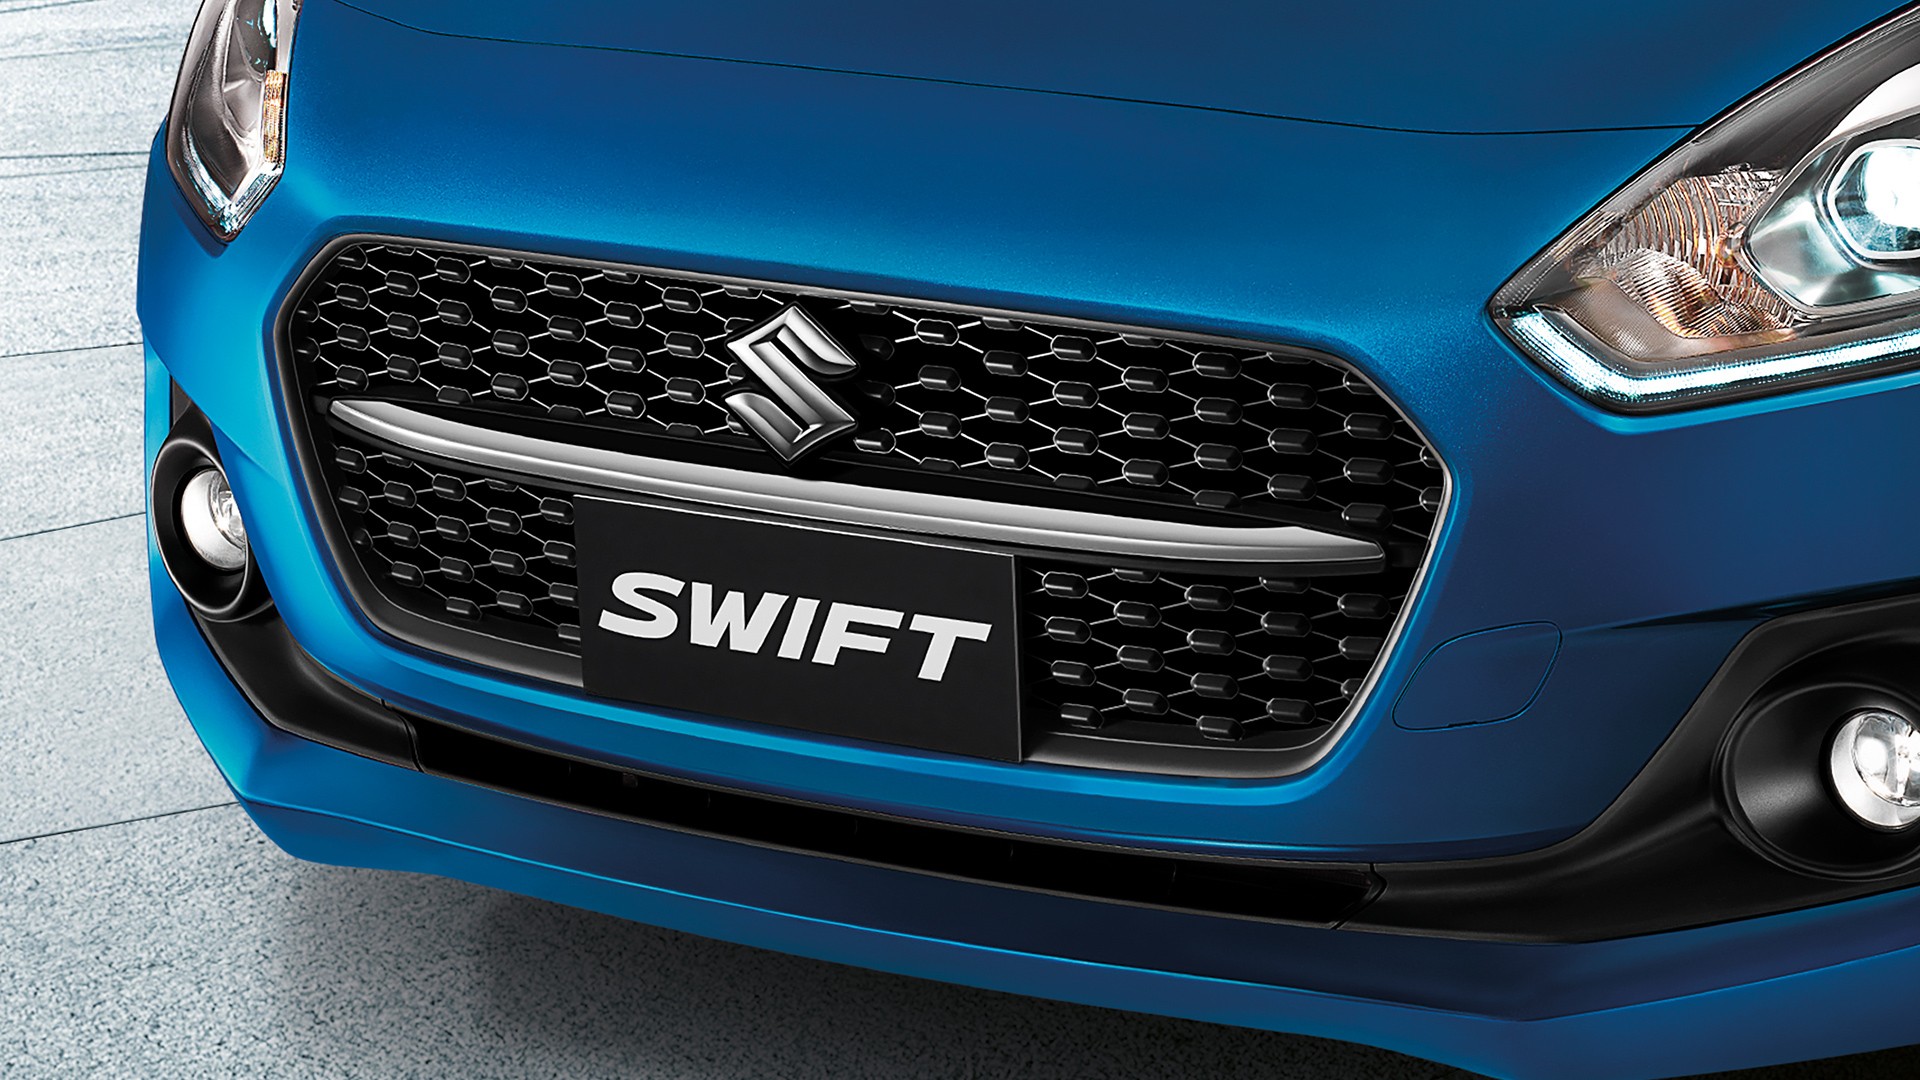 New Suzuki Swift Sporty Design Front Grille with Chrome Accent.